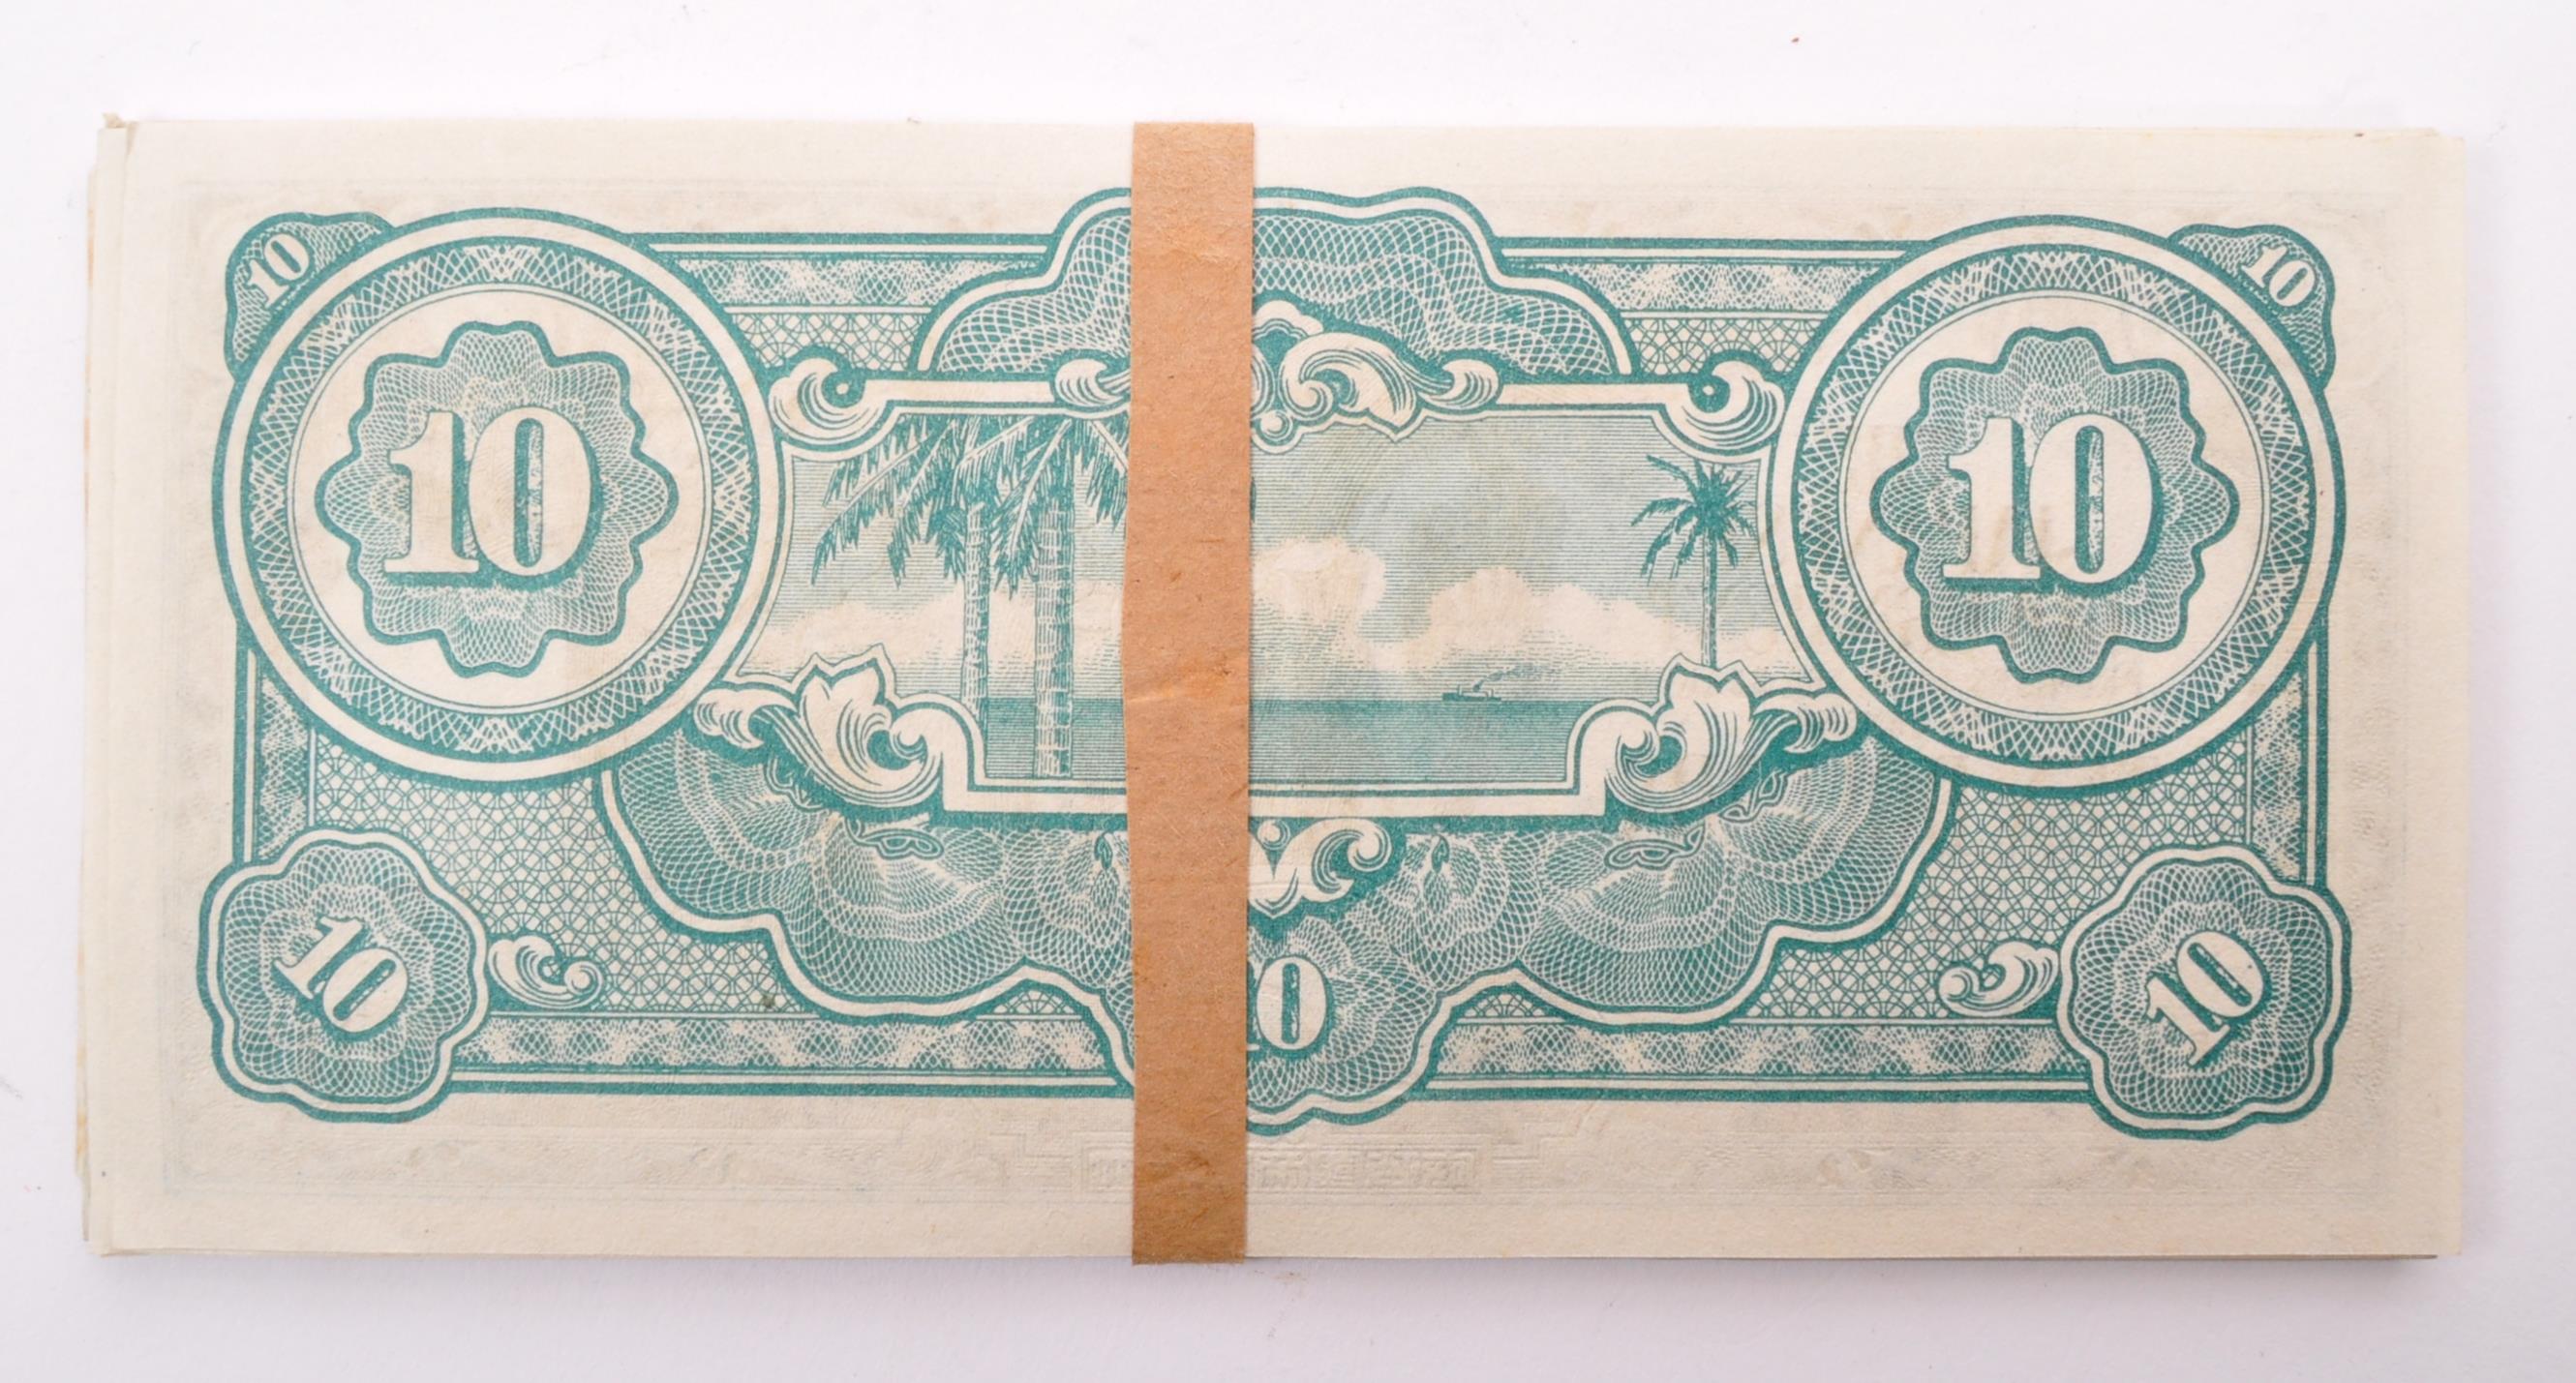 COLLECTION OF 1940S WWII PACIFIC WAS OCCUPATION BANK NOTES - Image 3 of 7